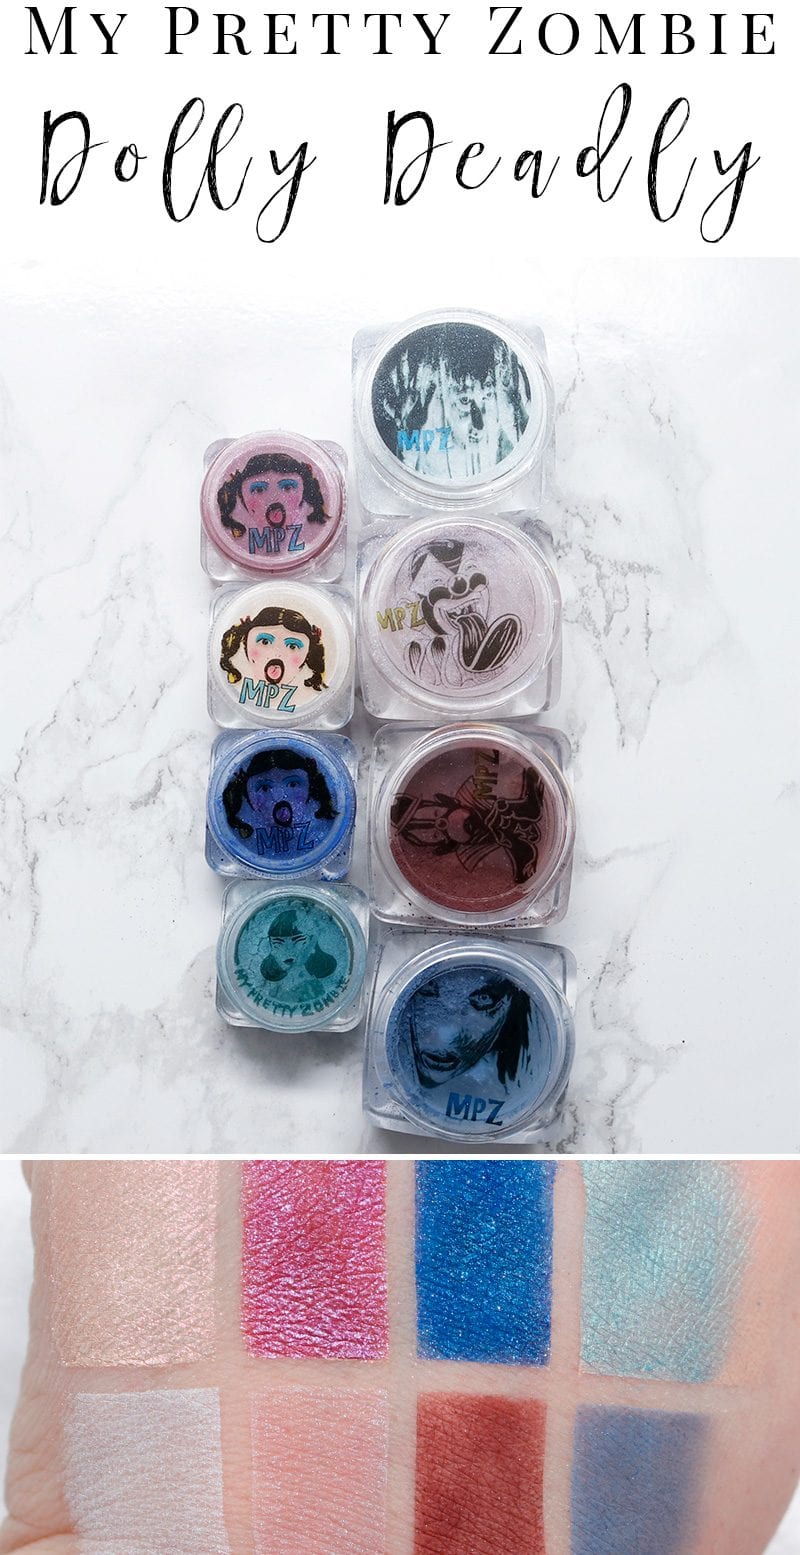 My Pretty Zombie Dolly Deadly Collection Review, Swatches Giveaway